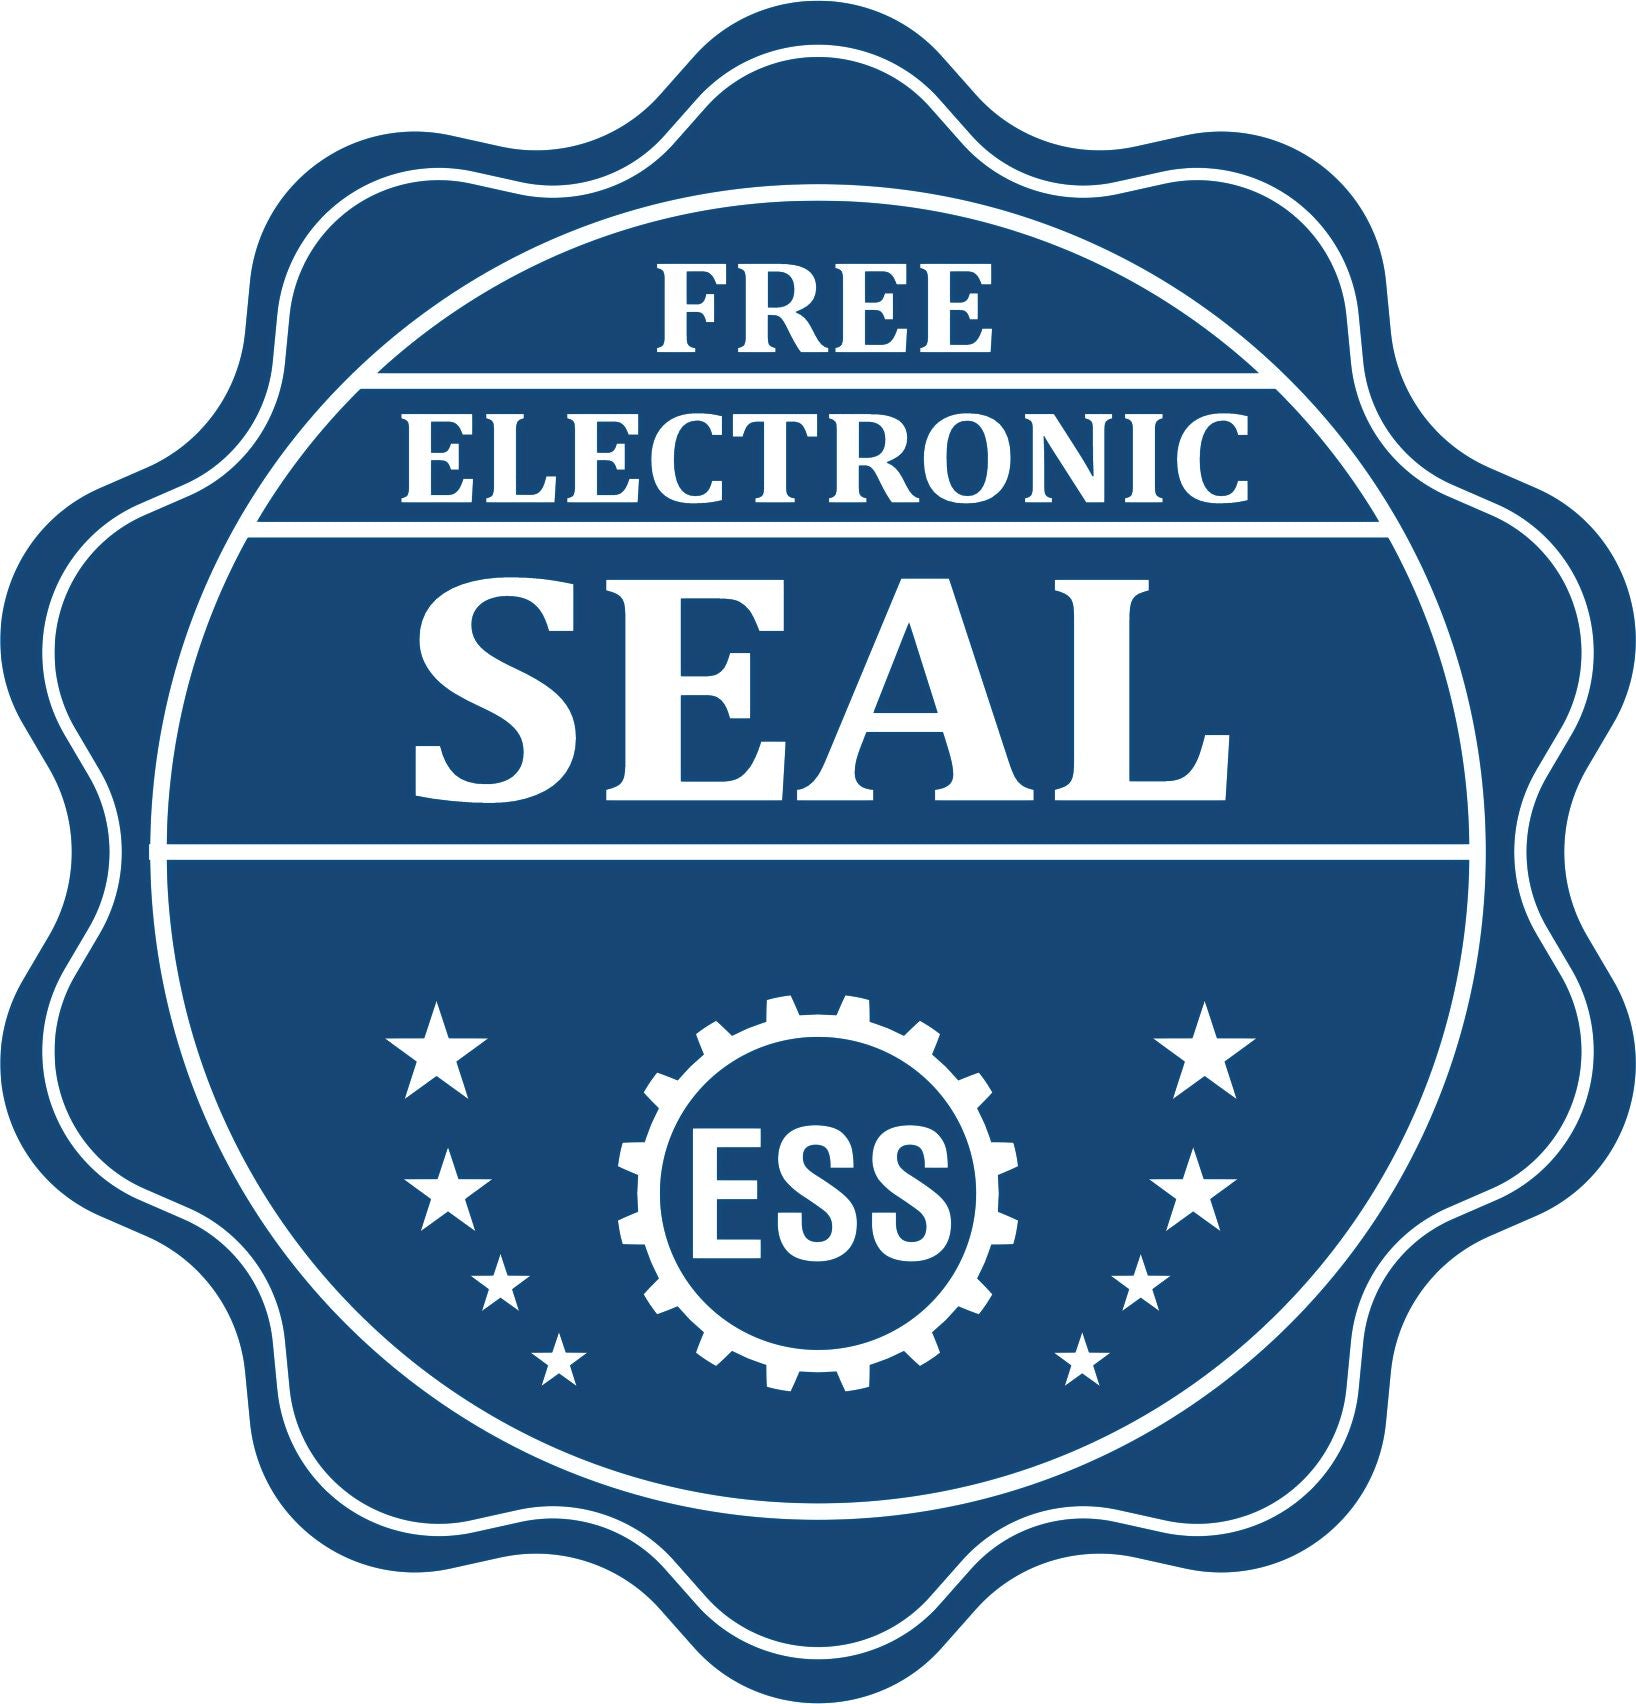 A badge showing a free electronic seal for the State of Arkansas Extended Long Reach Geologist Seal with stars and the ESS gear on the emblem.